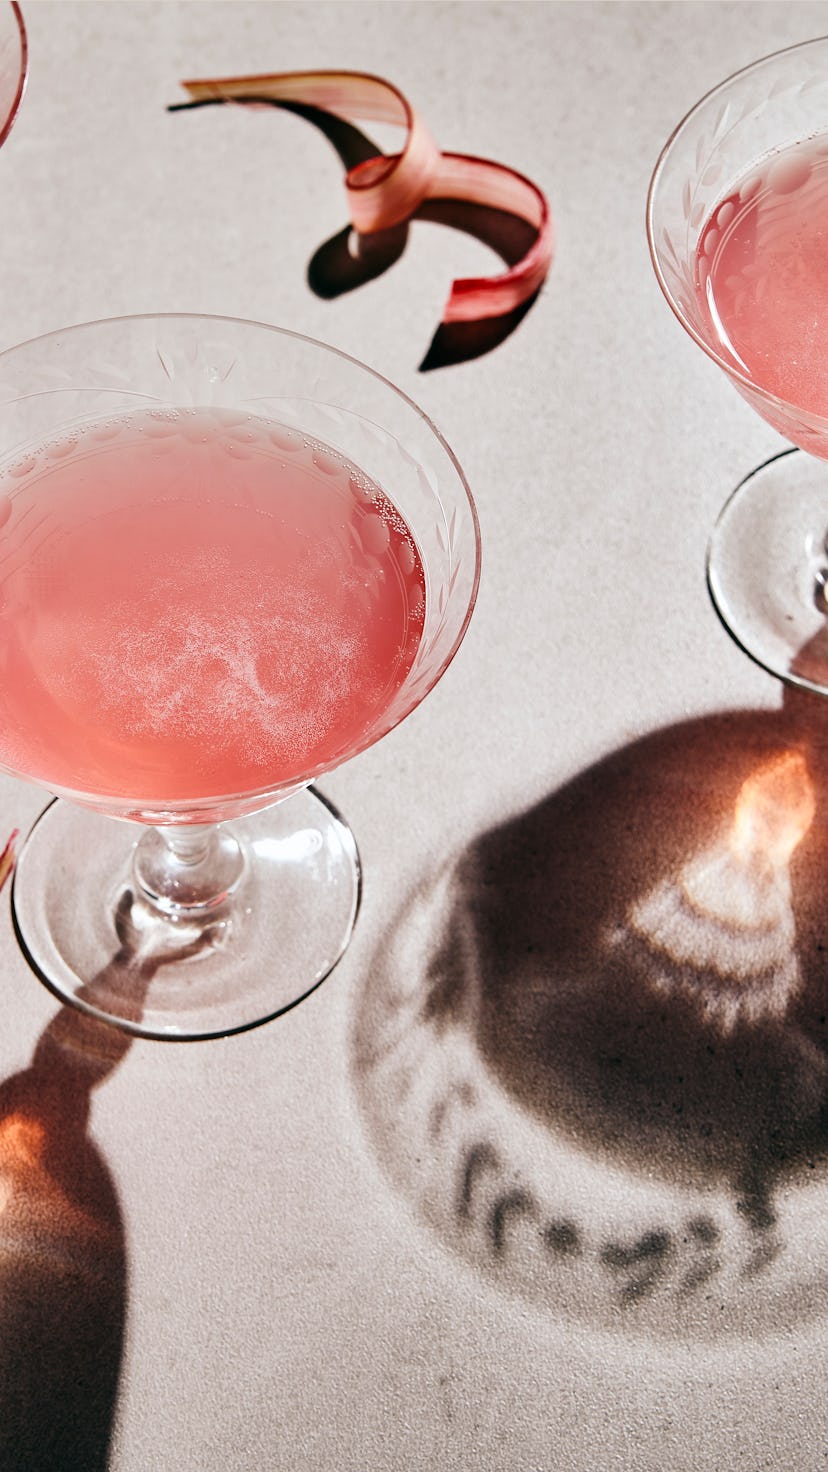 3 glasses of rhubarb sparkling mocktail or wine on grey table with dark shadows